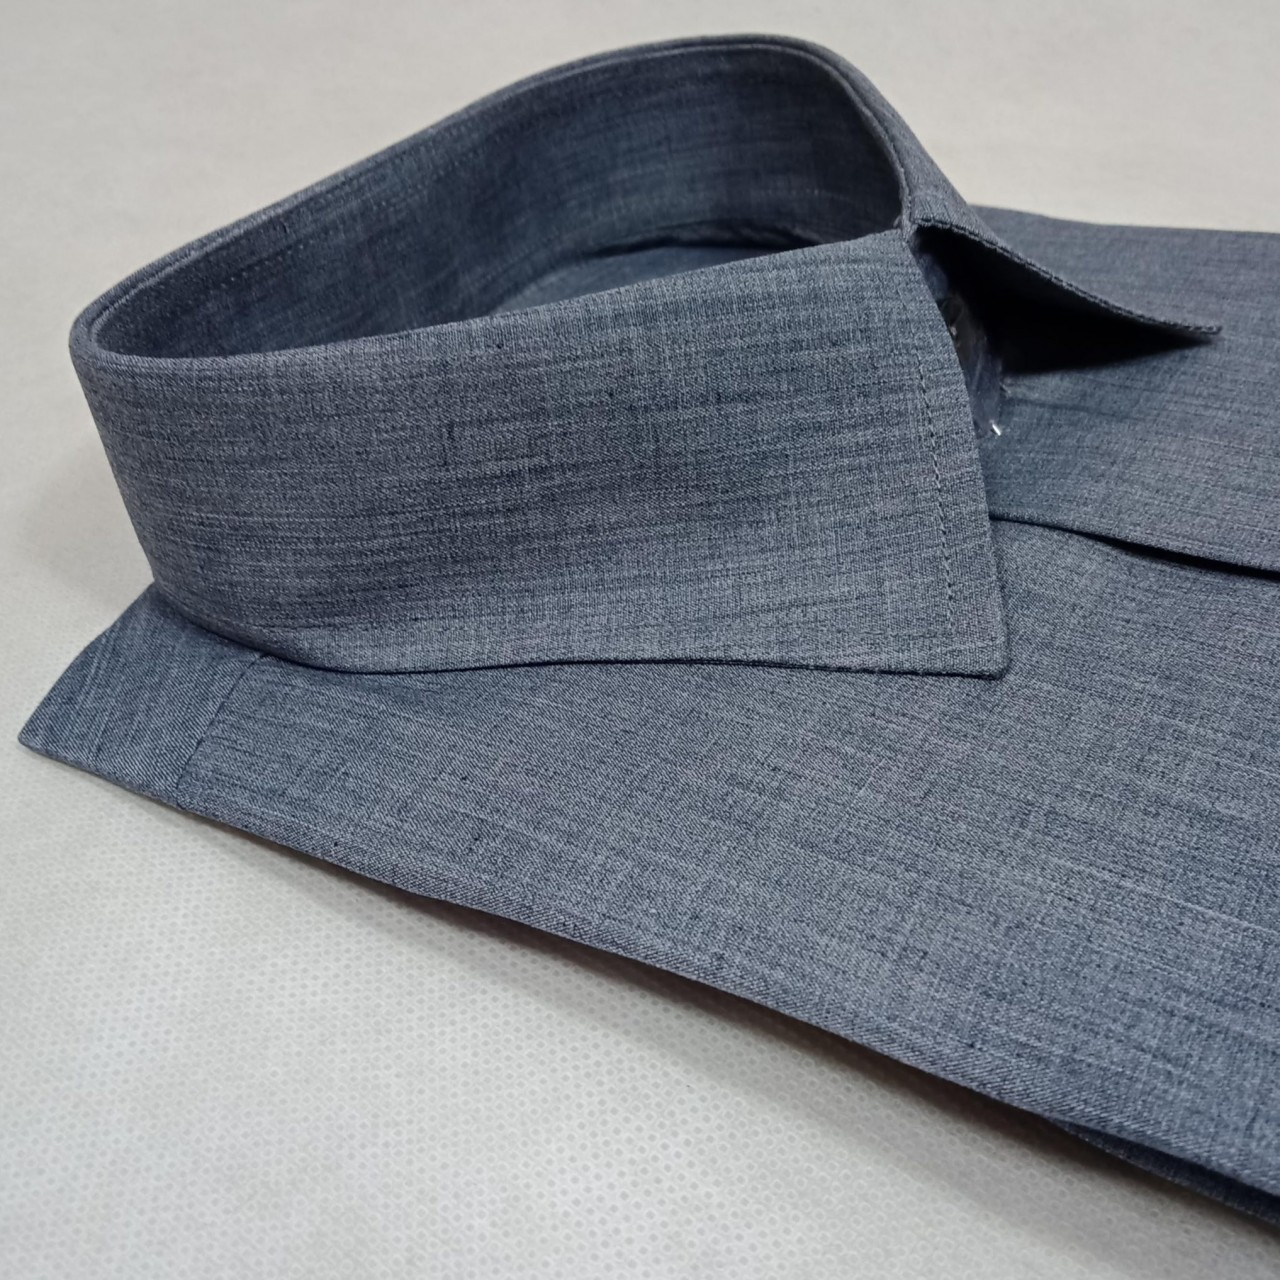 Raven Chambray Formal Shirt For Men - Double Needle Stitching